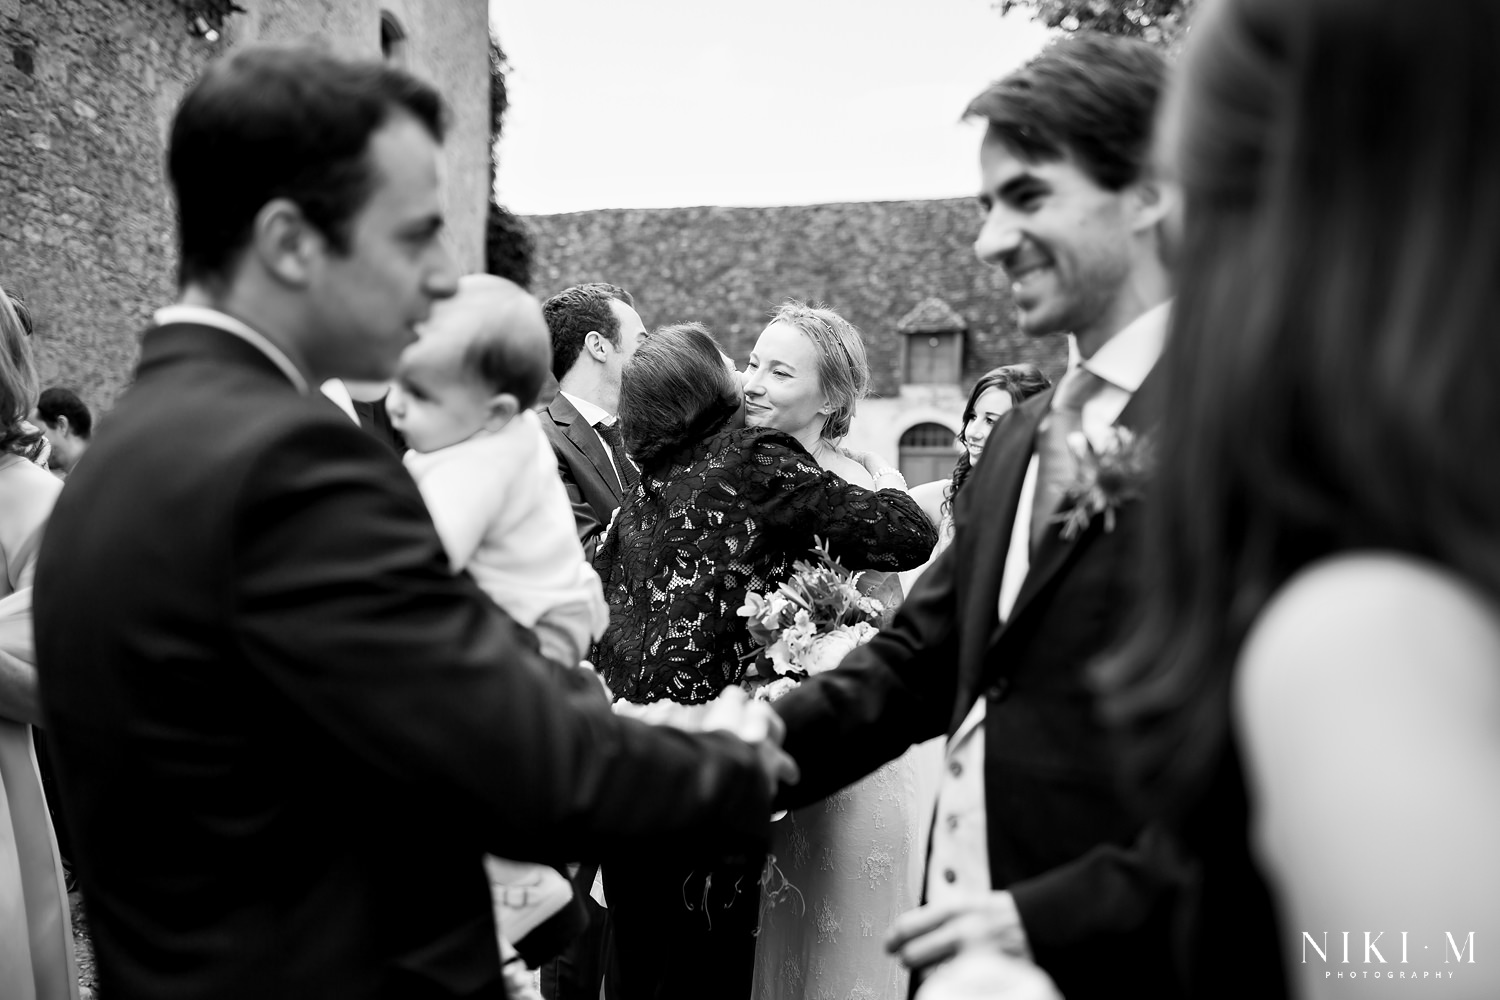 Couple are congratulated after their marriage ceremony at Chateau de la Bourlie Dordogne Wedding